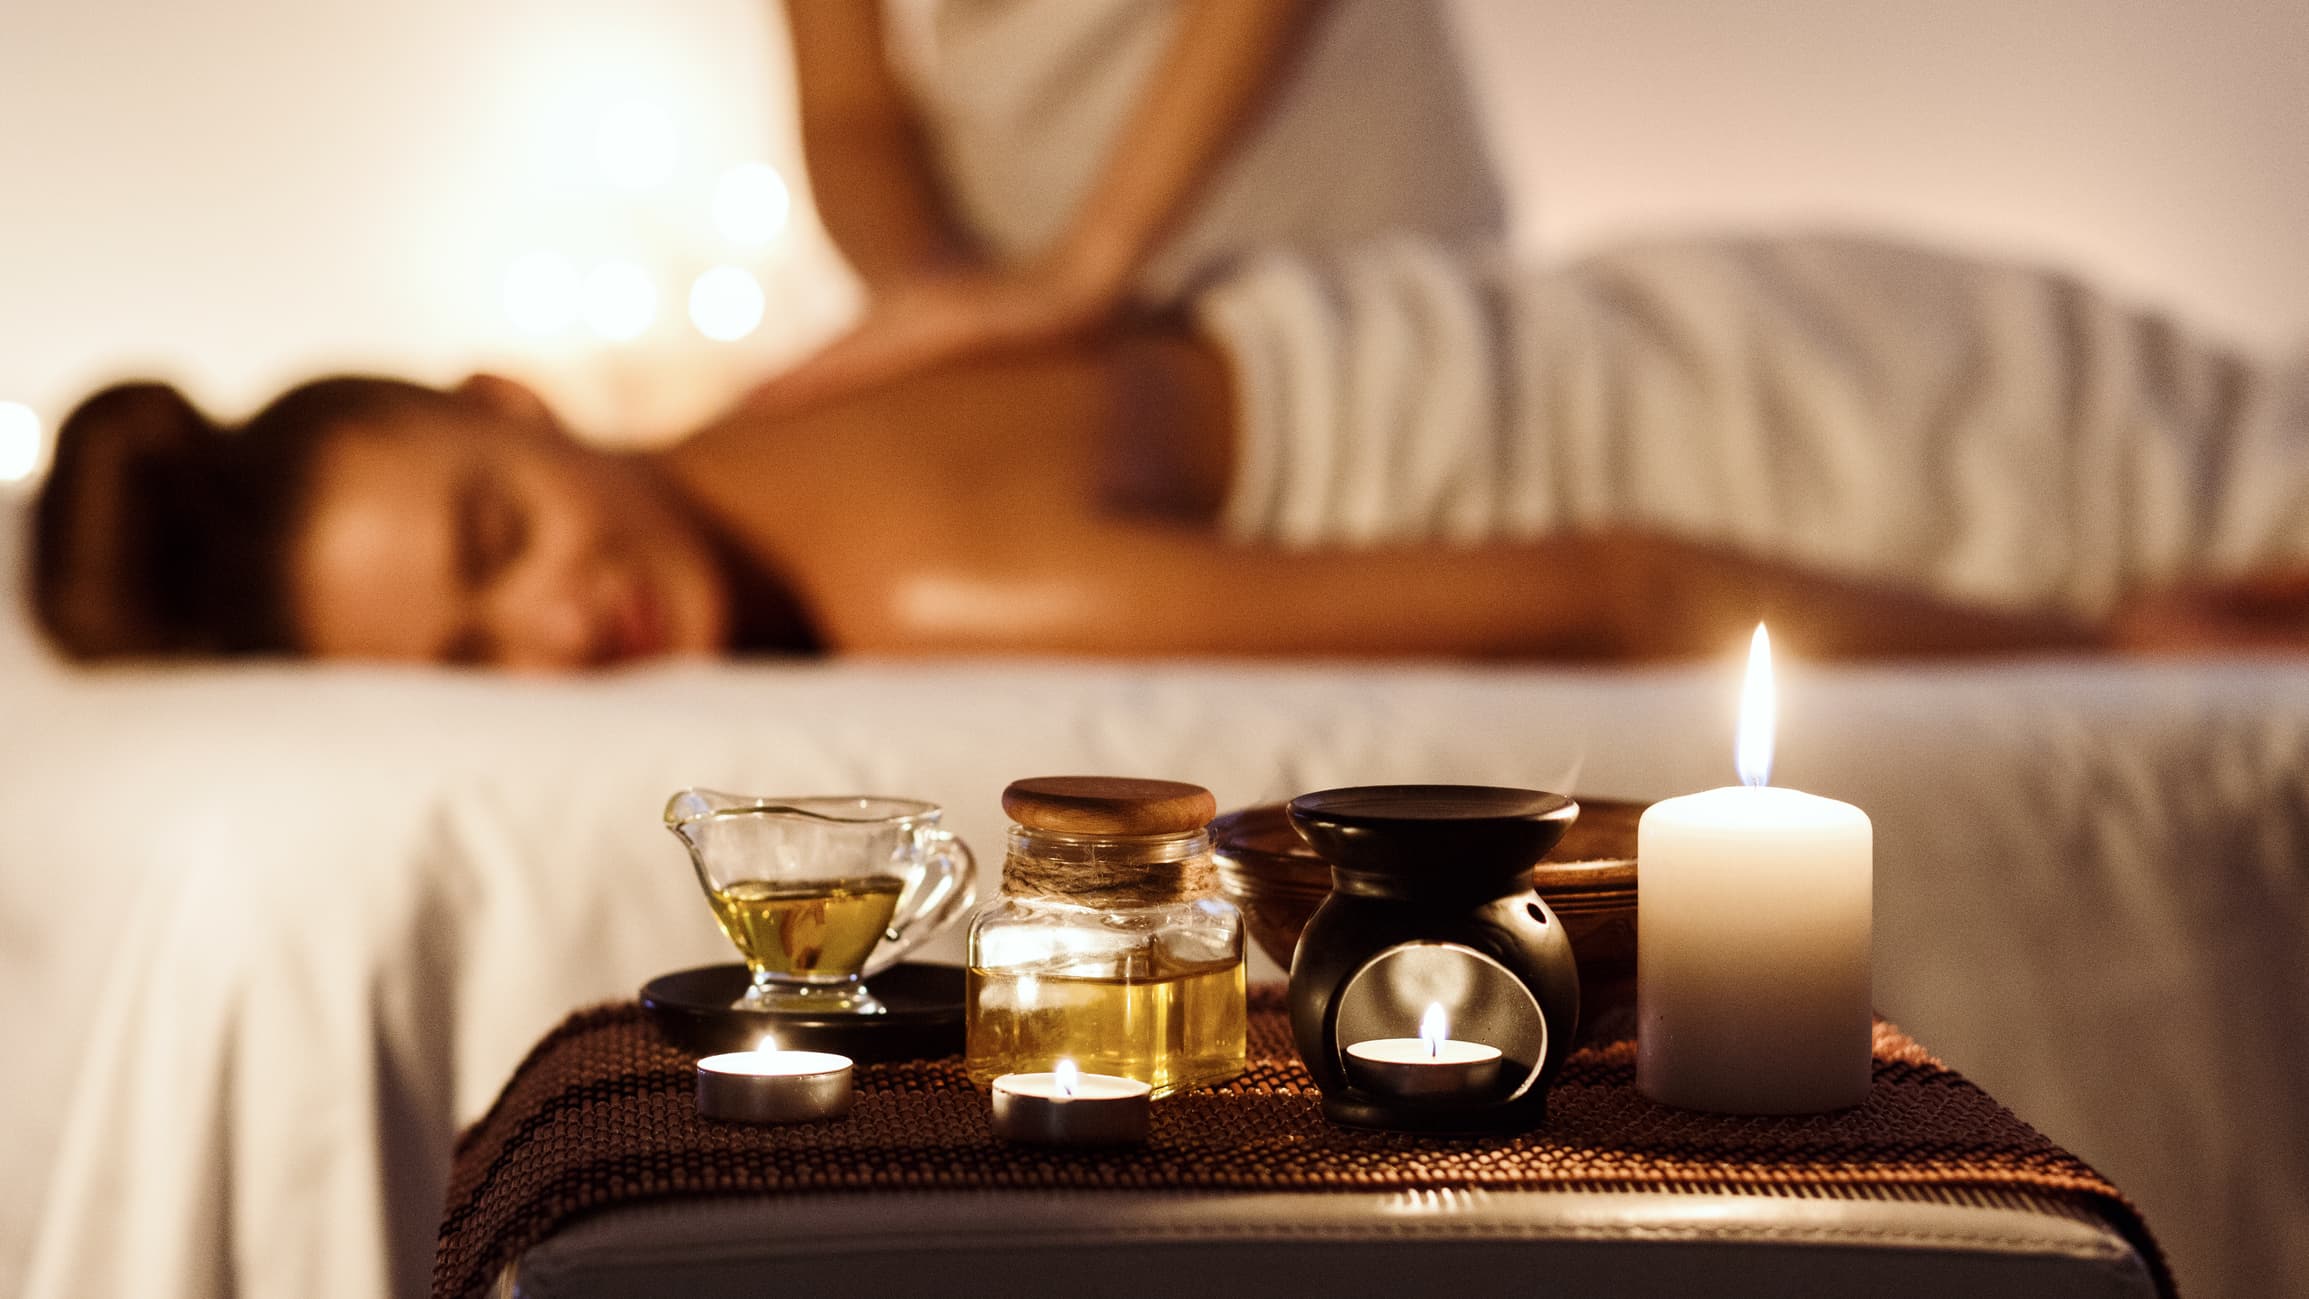 A woman's getting a massage with candles in the foreground